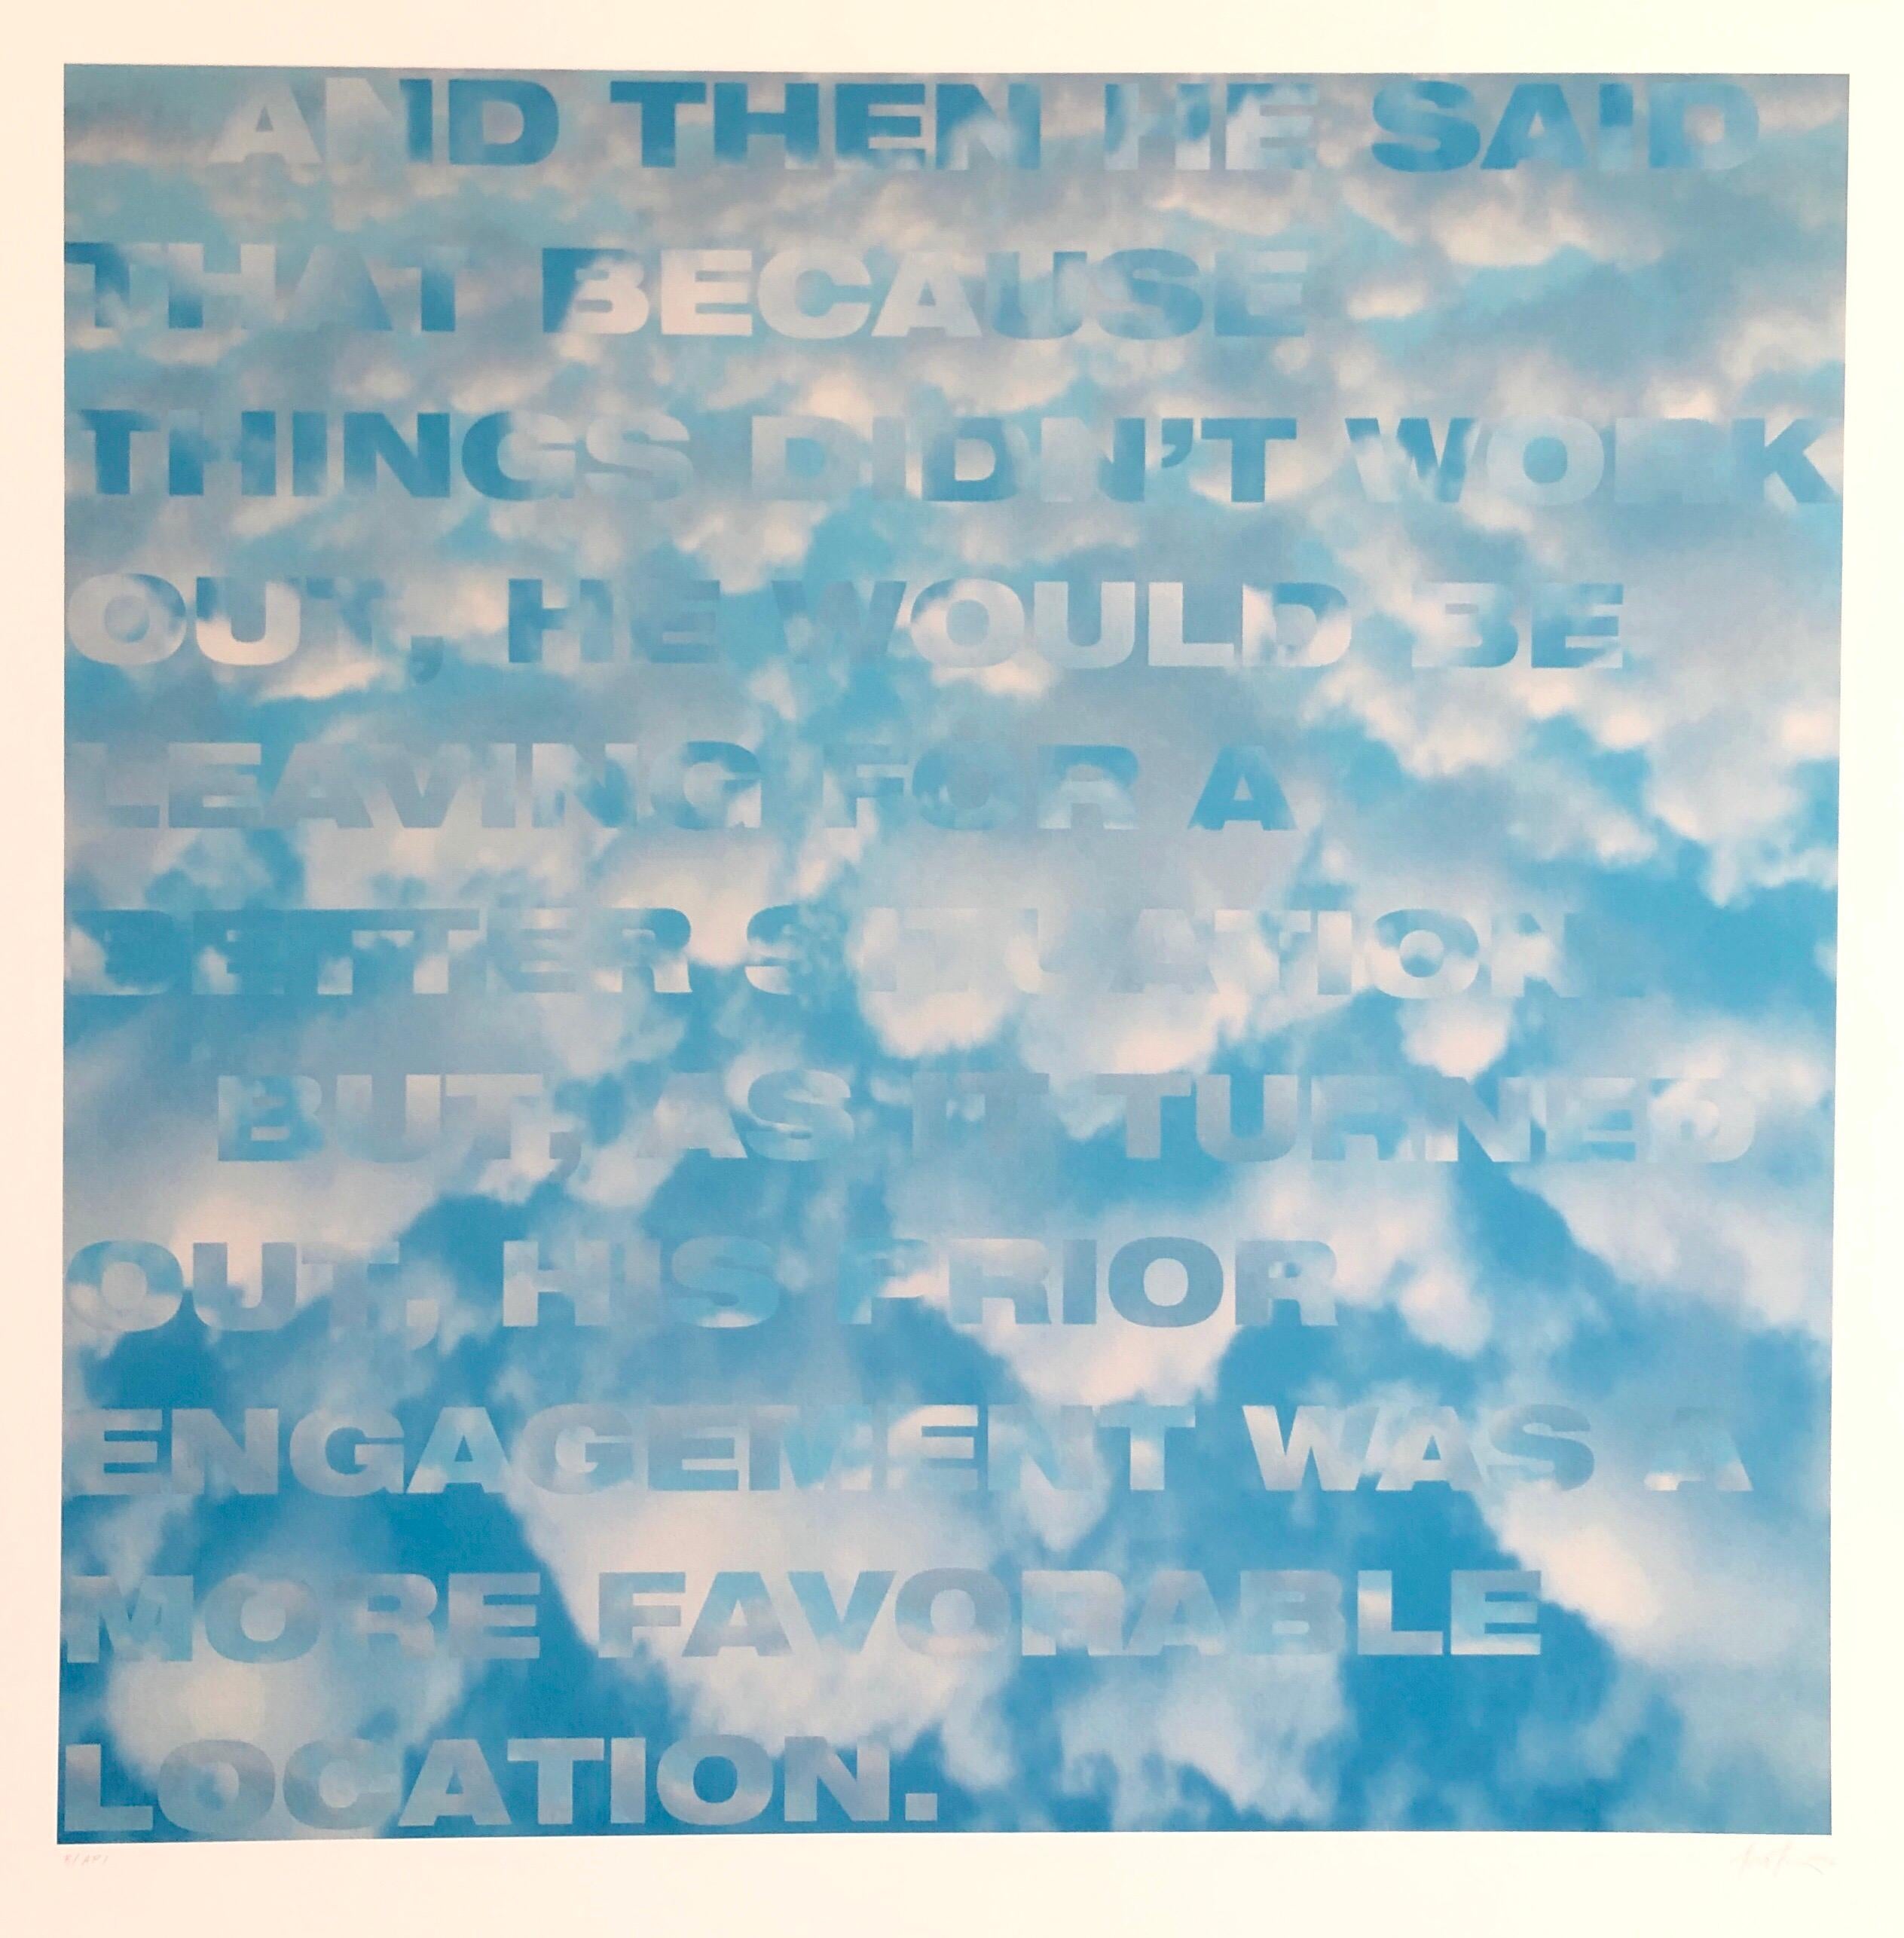 Fred Fehlau Abstract Print - Large Sky Blue Color Iris Print Text Based Conceptual Muse X LA Artist 1 of 2 B